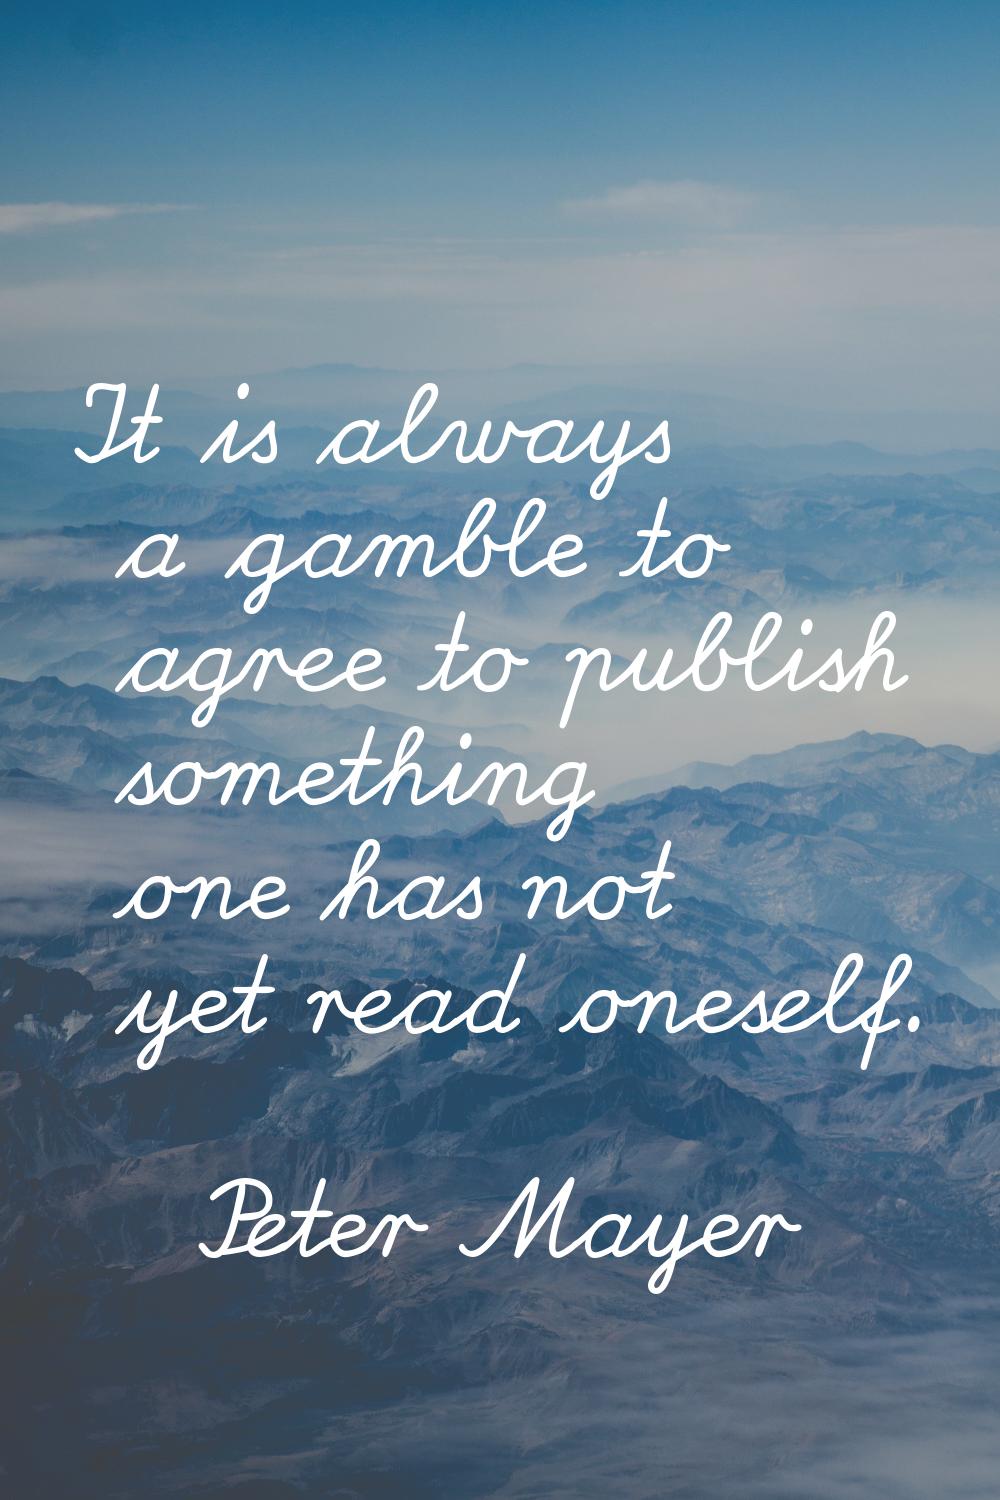 It is always a gamble to agree to publish something one has not yet read oneself.